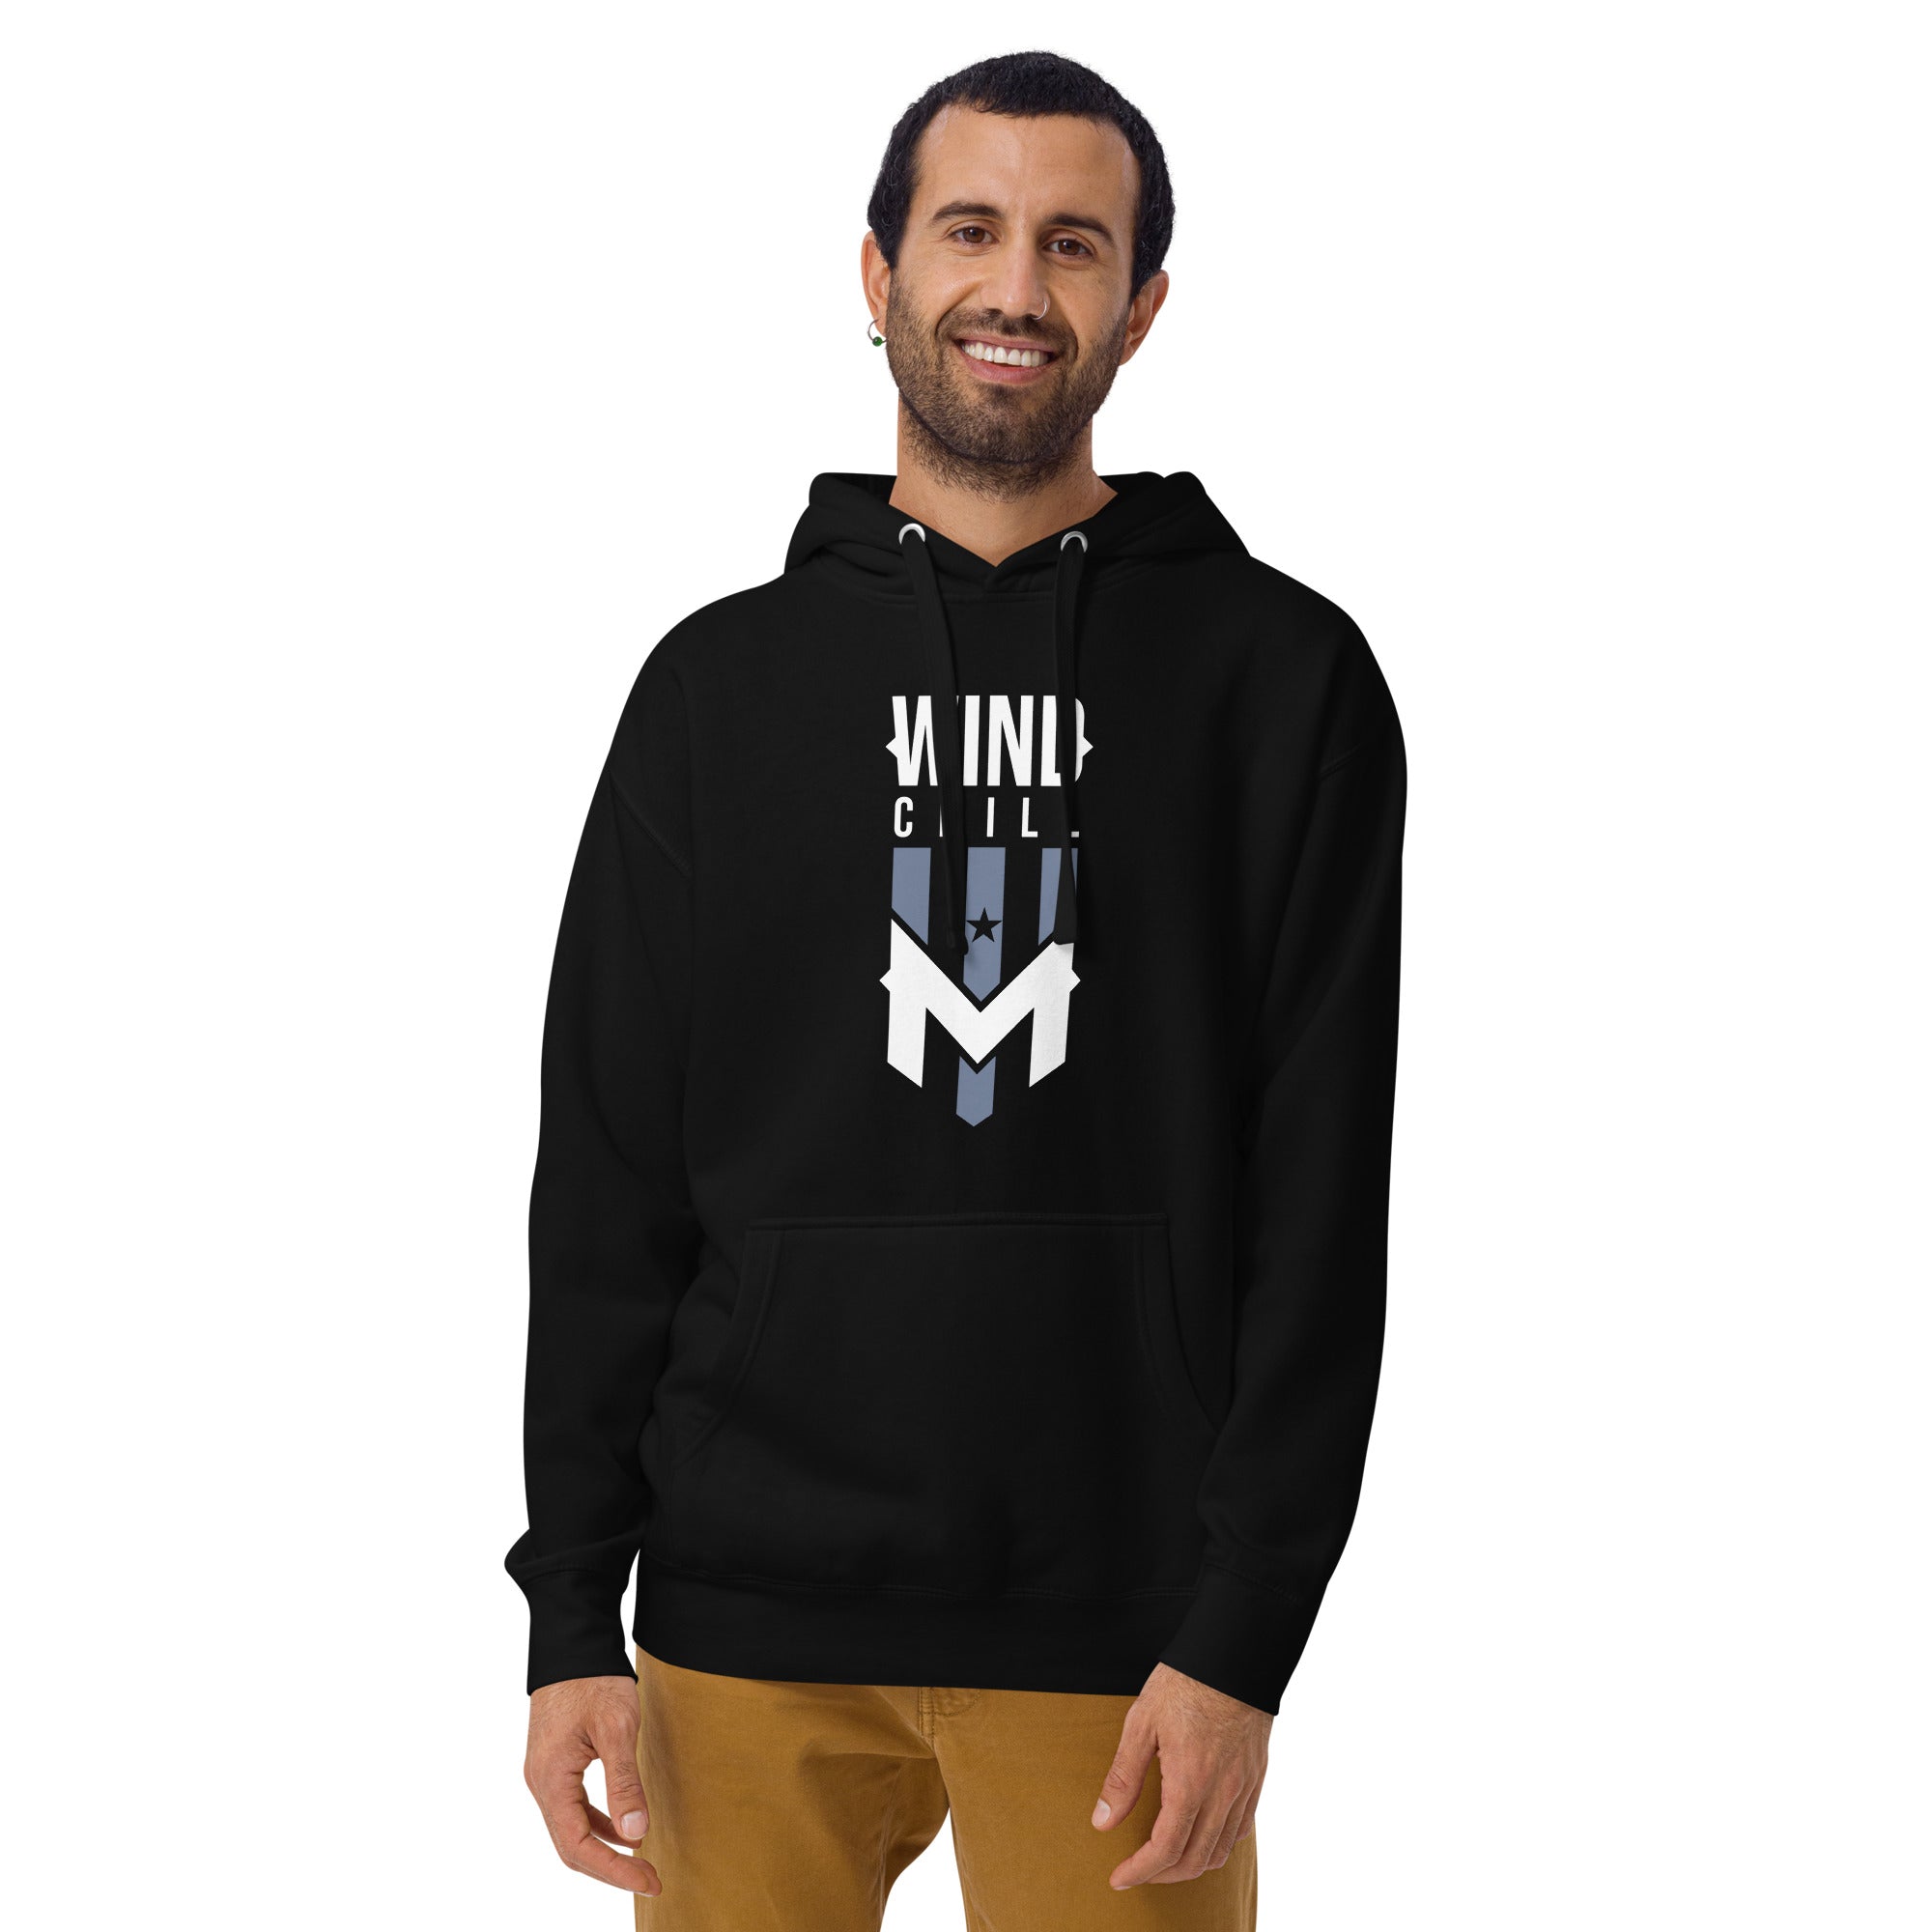 Wind Chill Black Stacked Hooded Sweatshirt